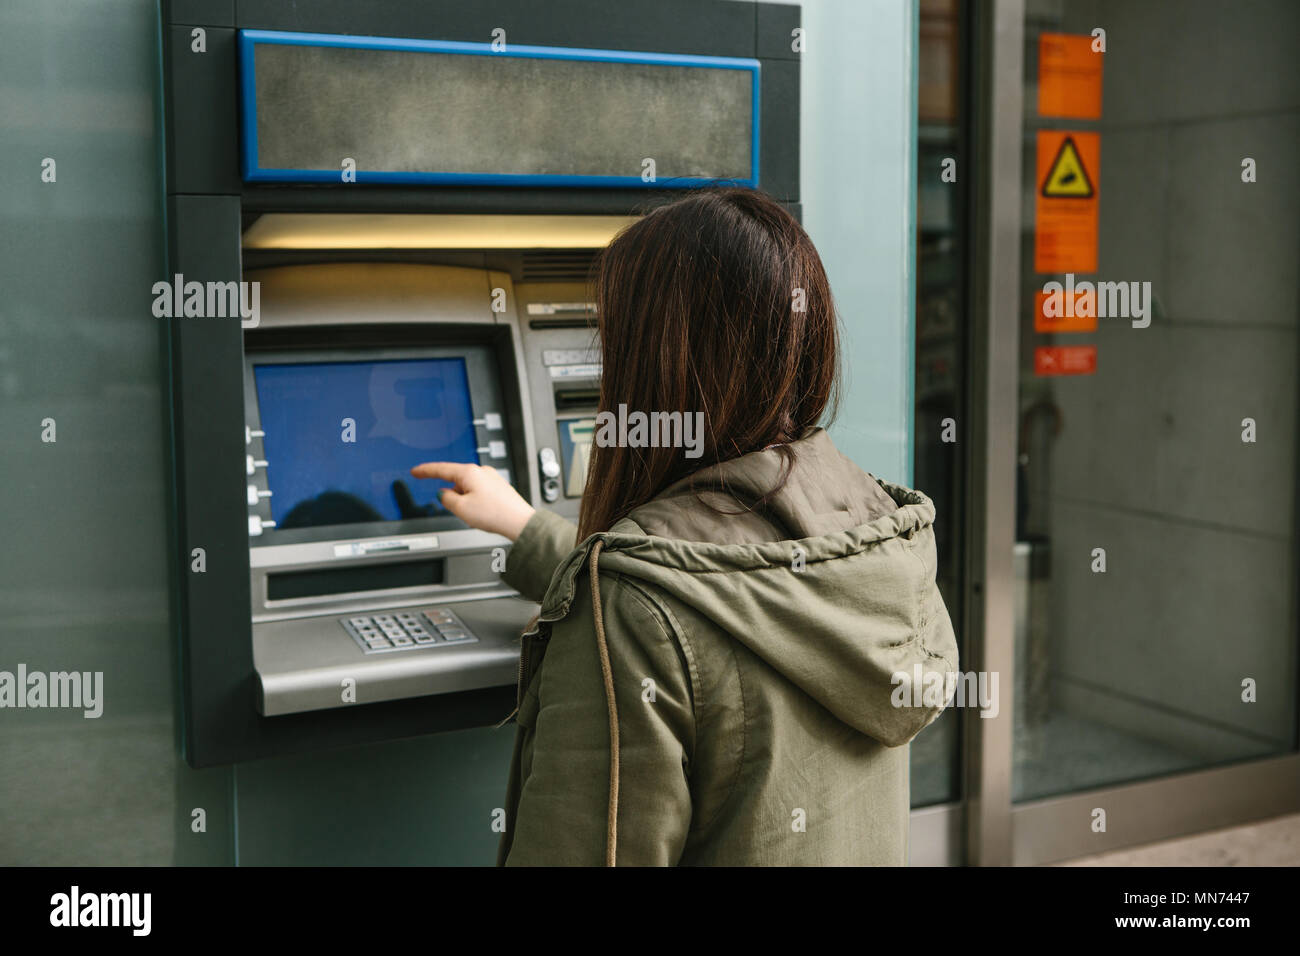 A young woman takes money from an ATM. Grabs a card from the ATM. Finance, credit card, withdrawal of money. Stock Photo